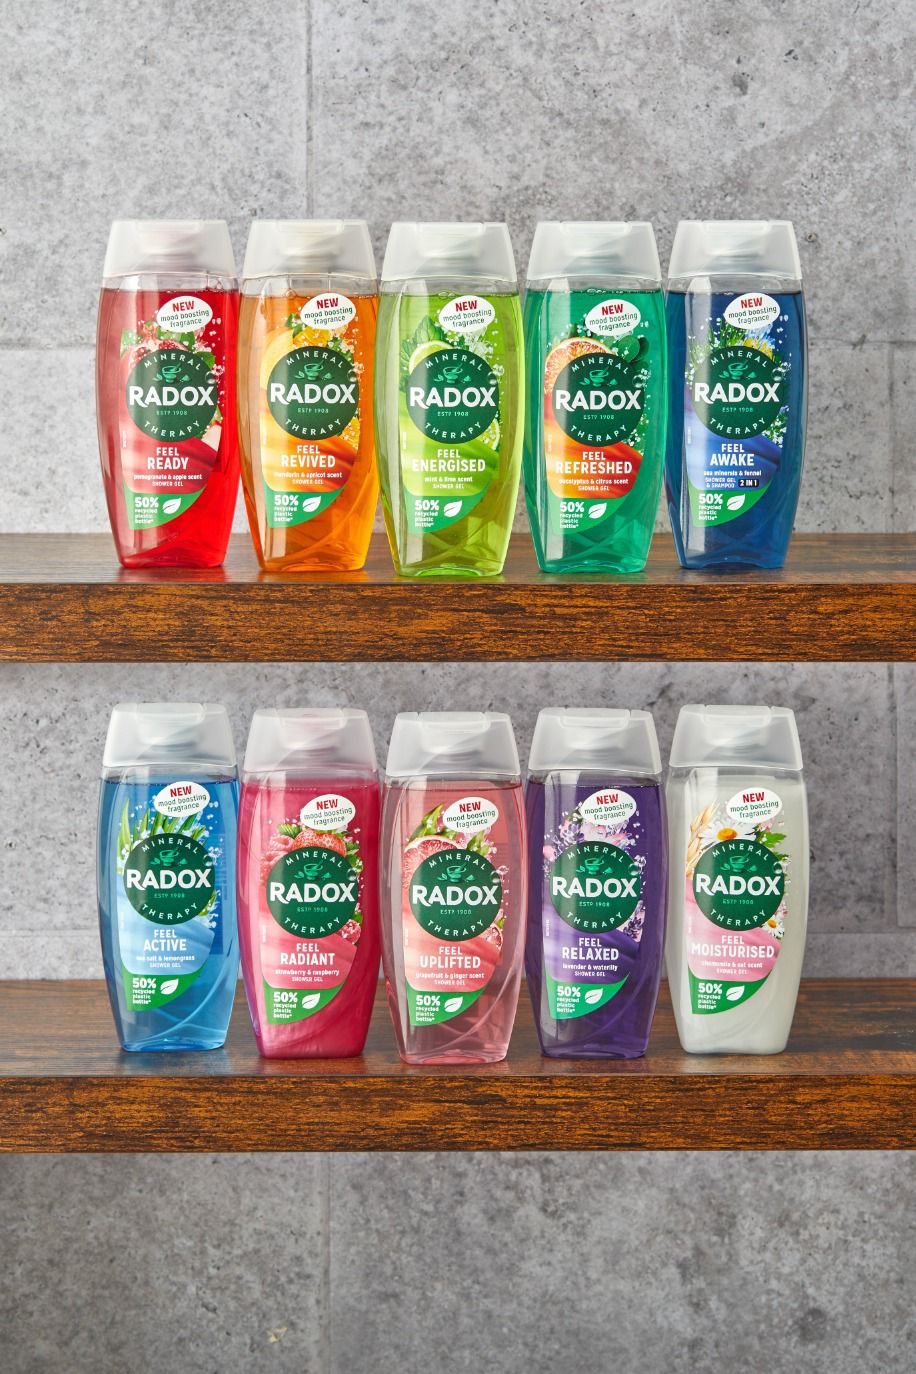 Radox launches new refillable bottles, mood-boost fragrances